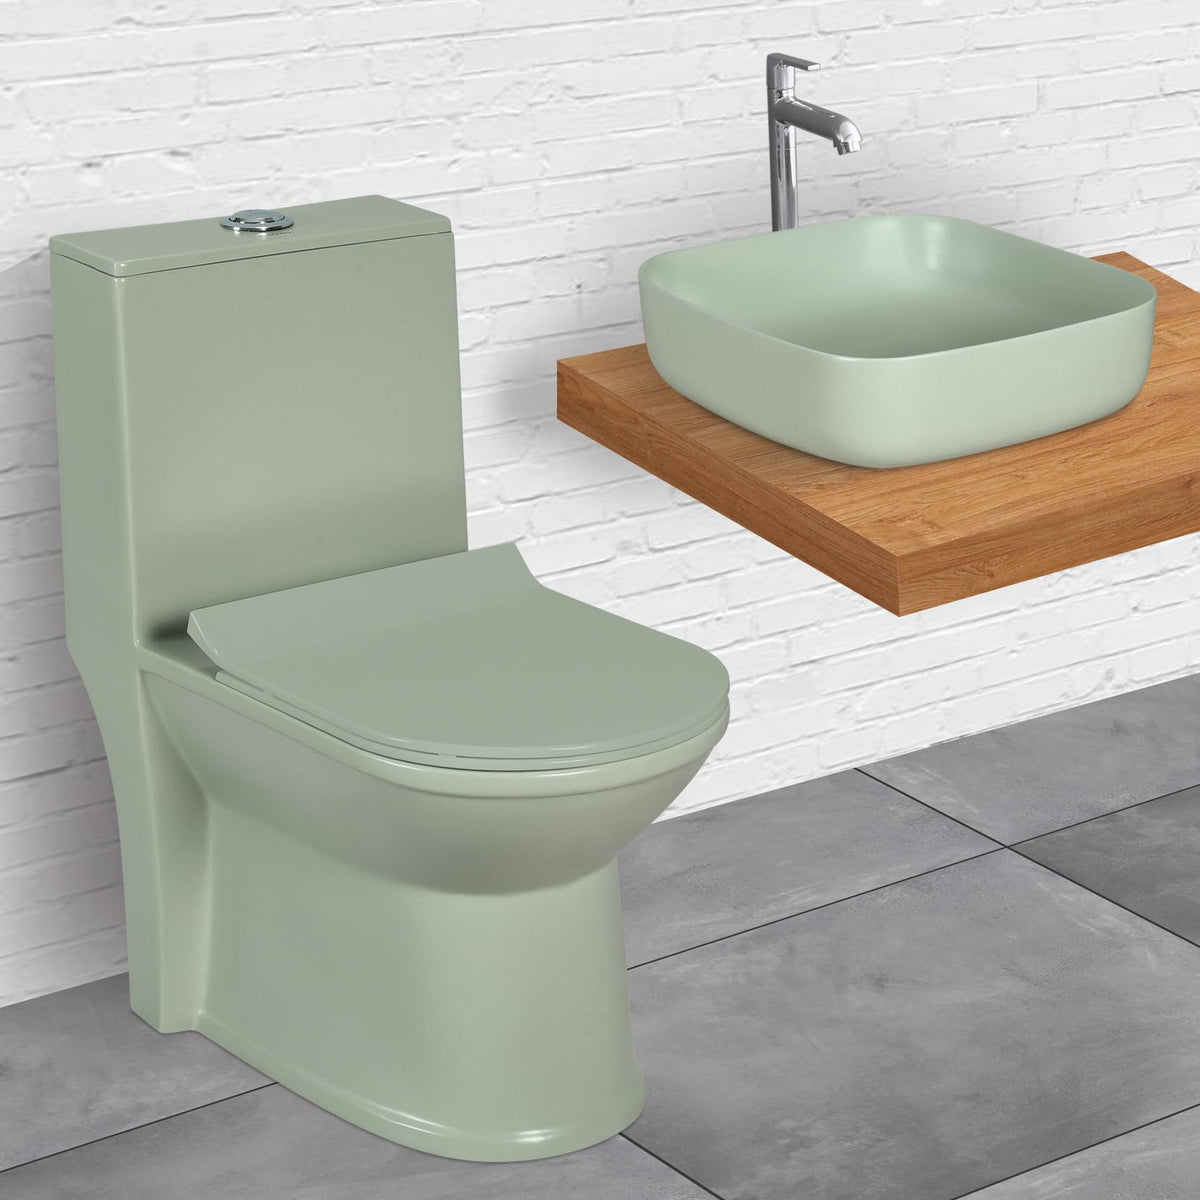 Plantex Ceramic One-Piece Commode with Counter-Top Basin for Bathroom/Western Toilet/Bathroom Wash Basin – Olive Green